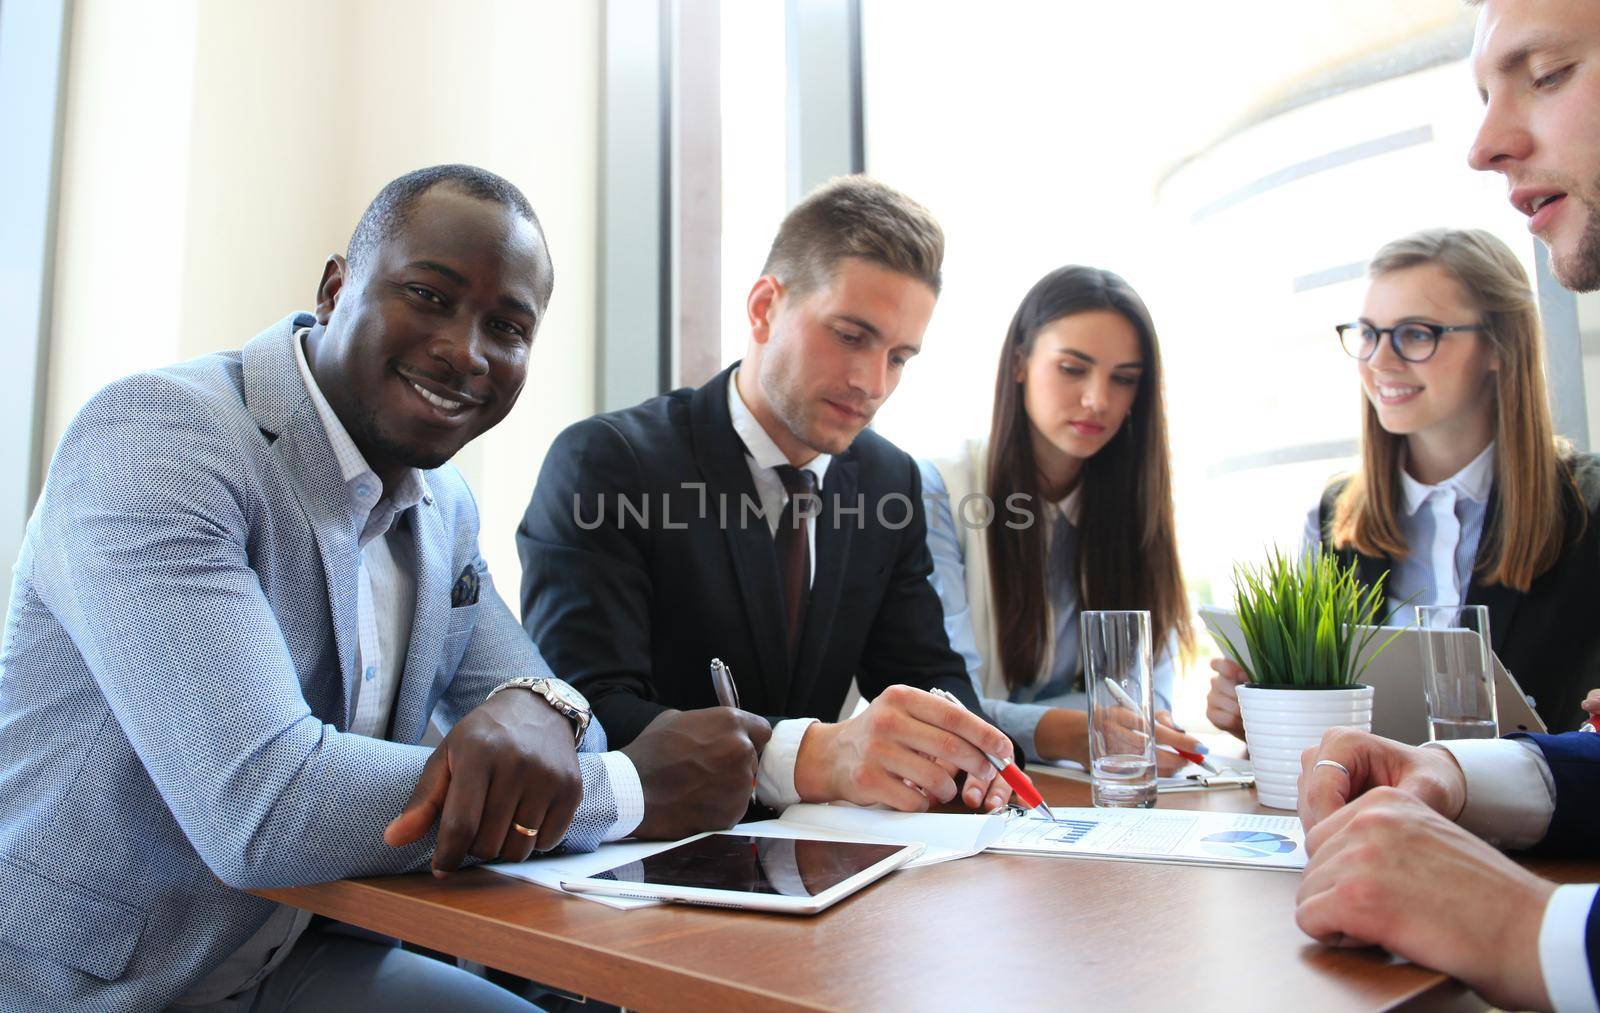 Business team discussing together business plans in office